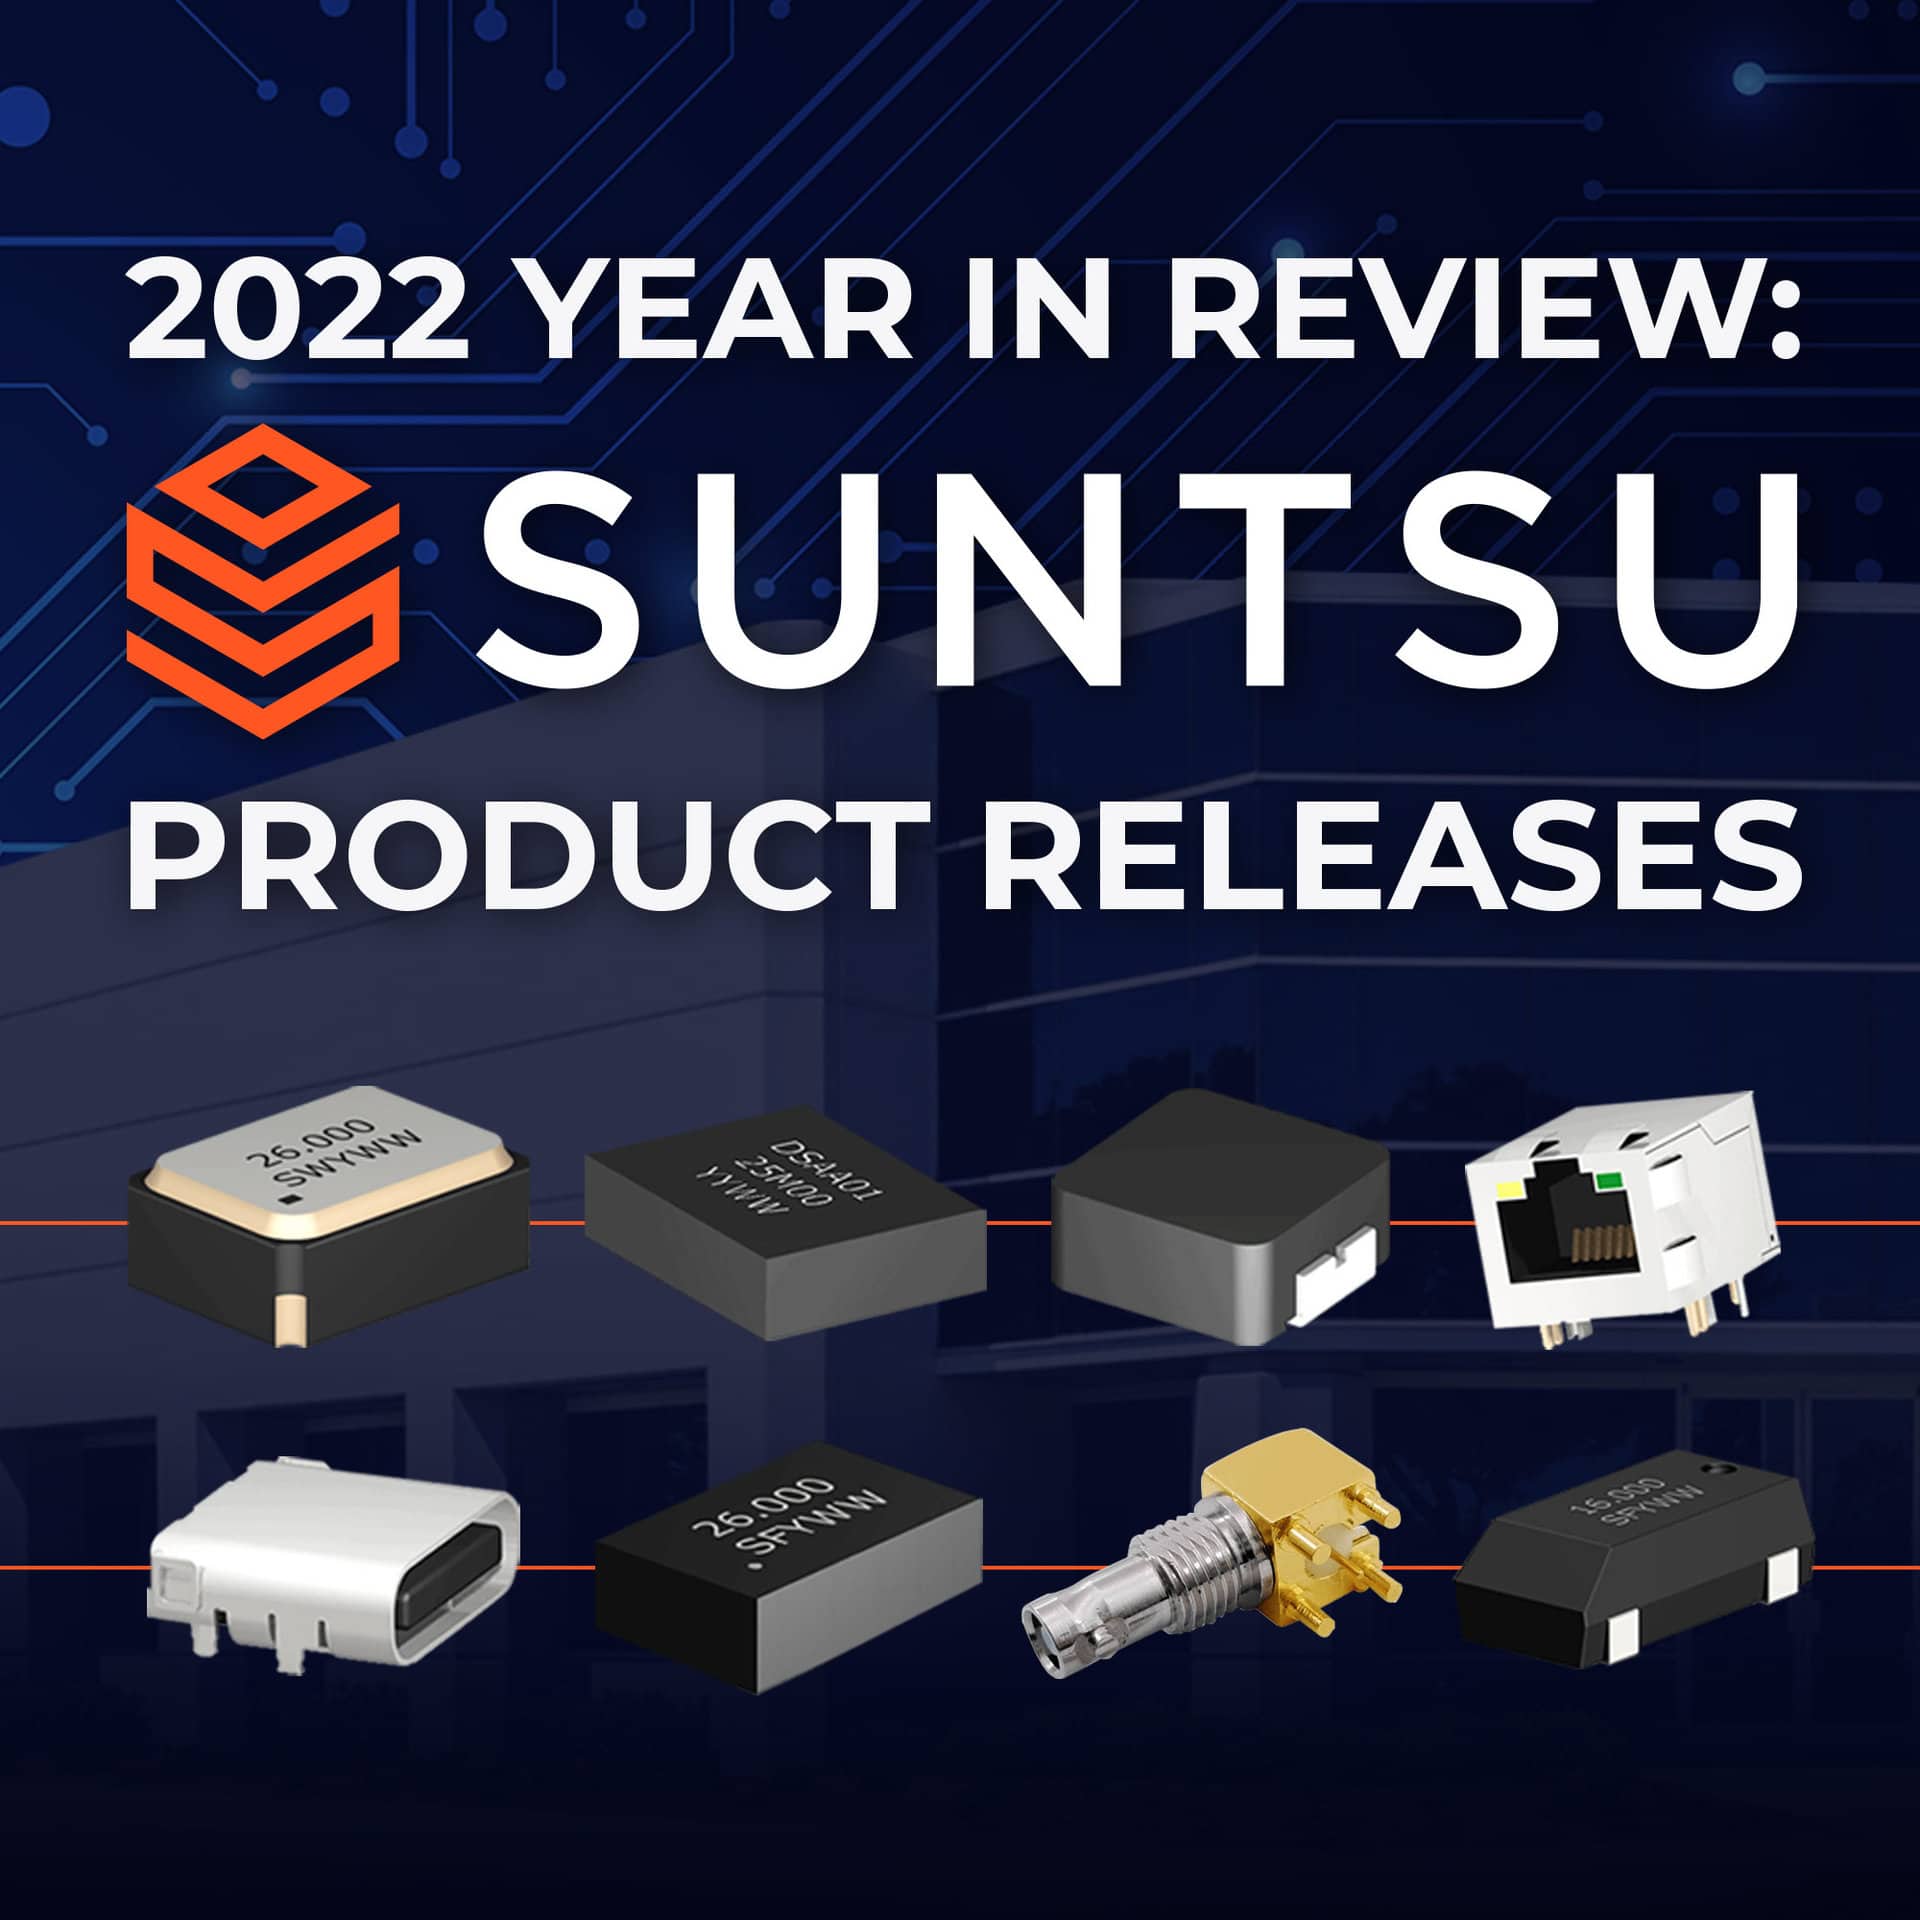 2022 Year in Review: Suntsu Product Releases